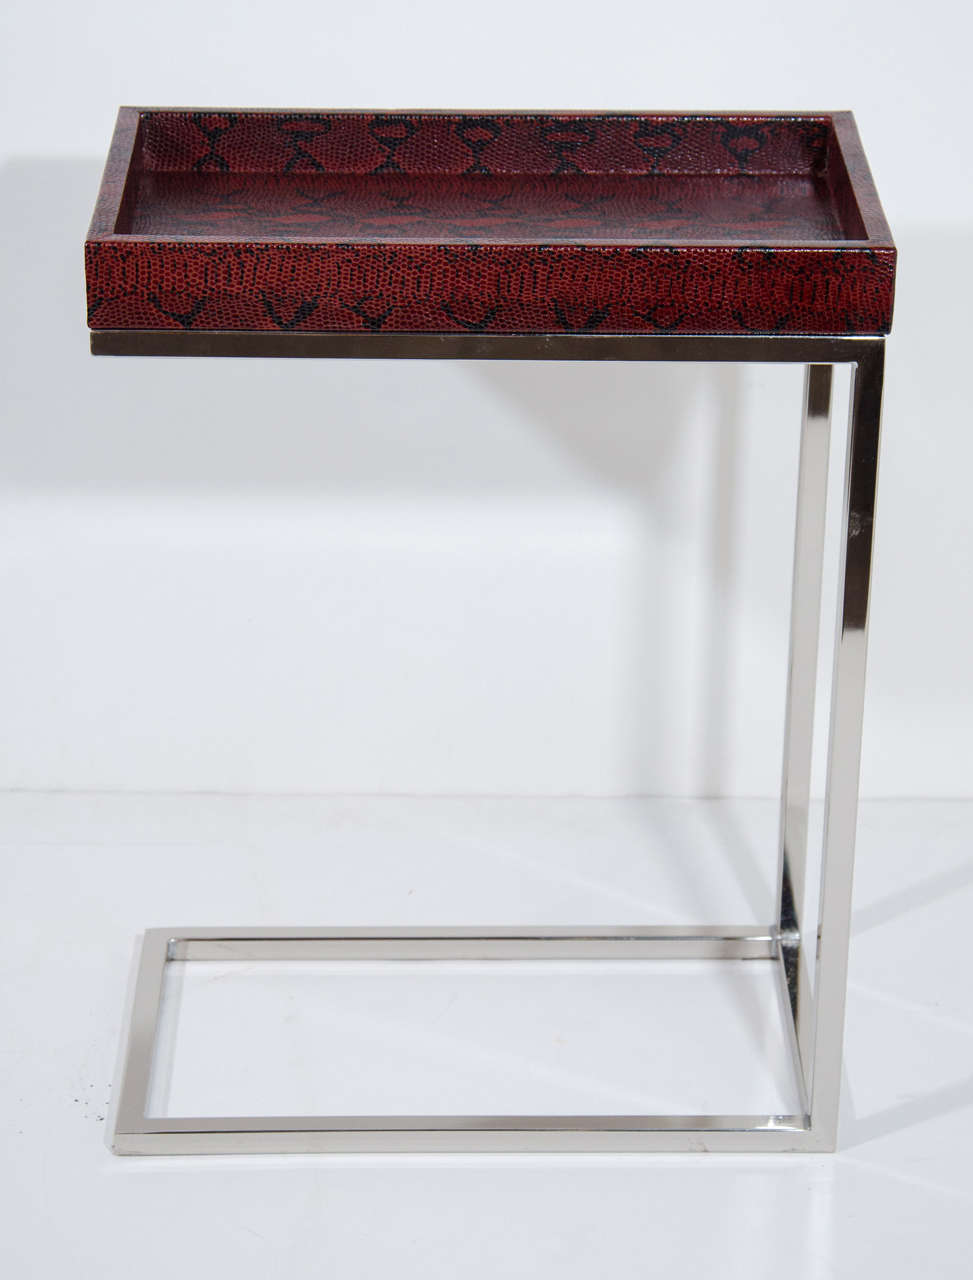 Modernist drinks table or side table with cantilevered base design in chrome, and with an embossed leather tray top with python print in garnet red.  Removable top functions as a serving tray.